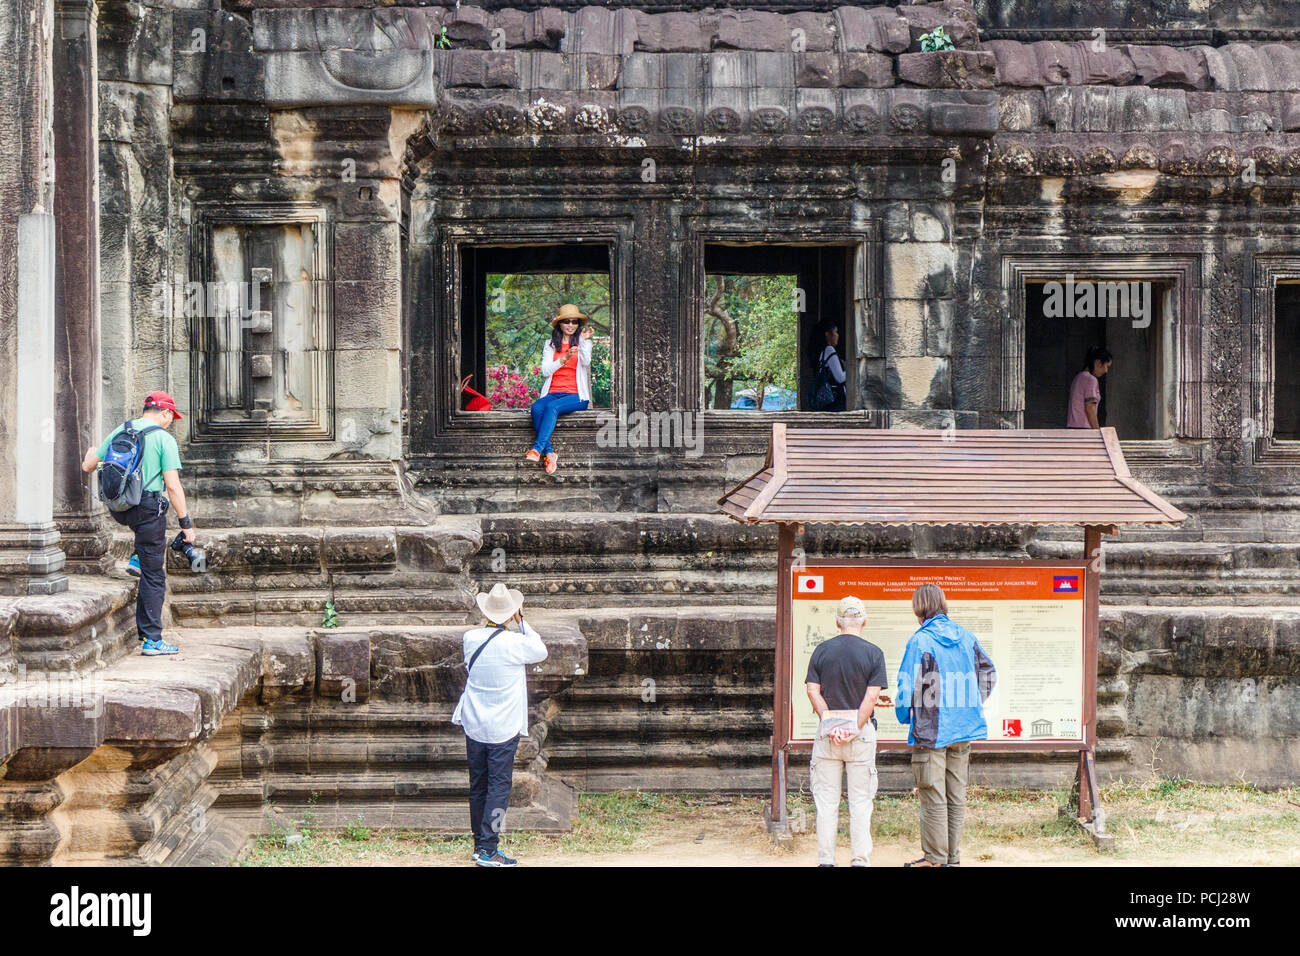 Angkor Wat, Cambodia - 11th January 2018: Chinese tourists posing for photos. They show liitle respect for ancient ruins. Stock Photo